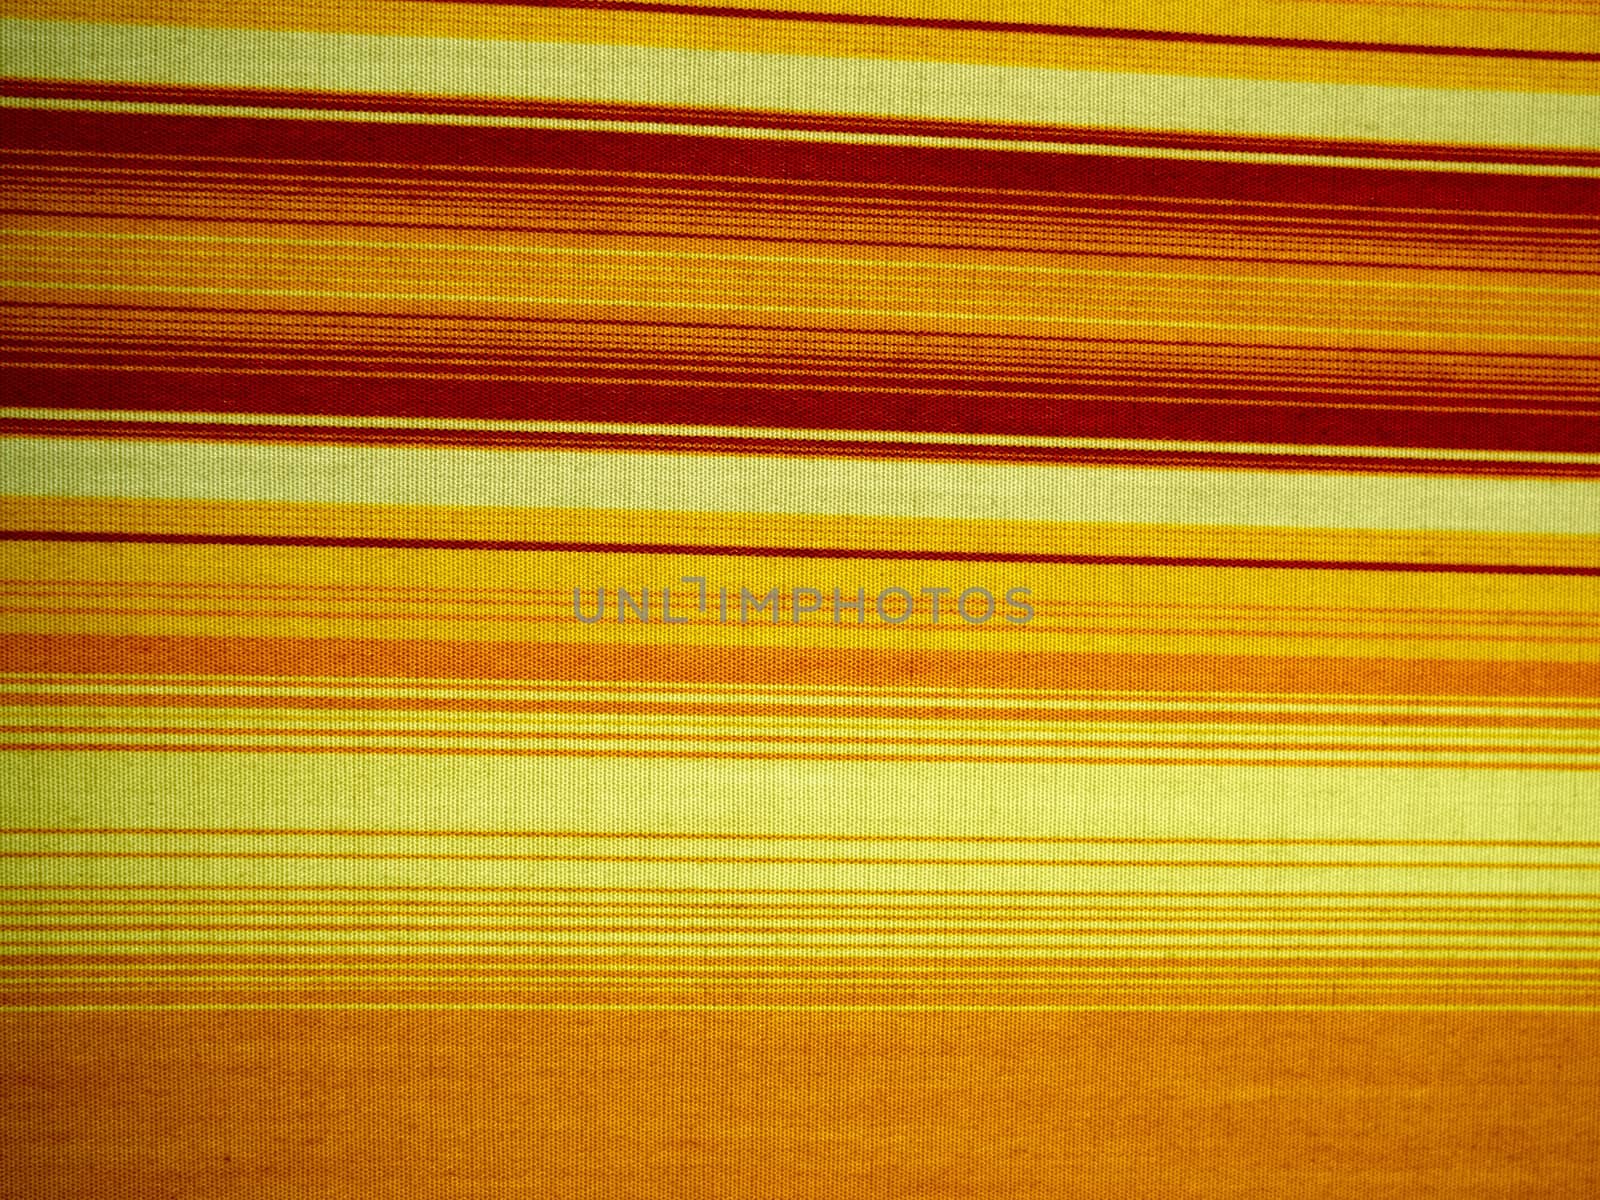 Fabric Cloth Texture Background by Ronyzmbow